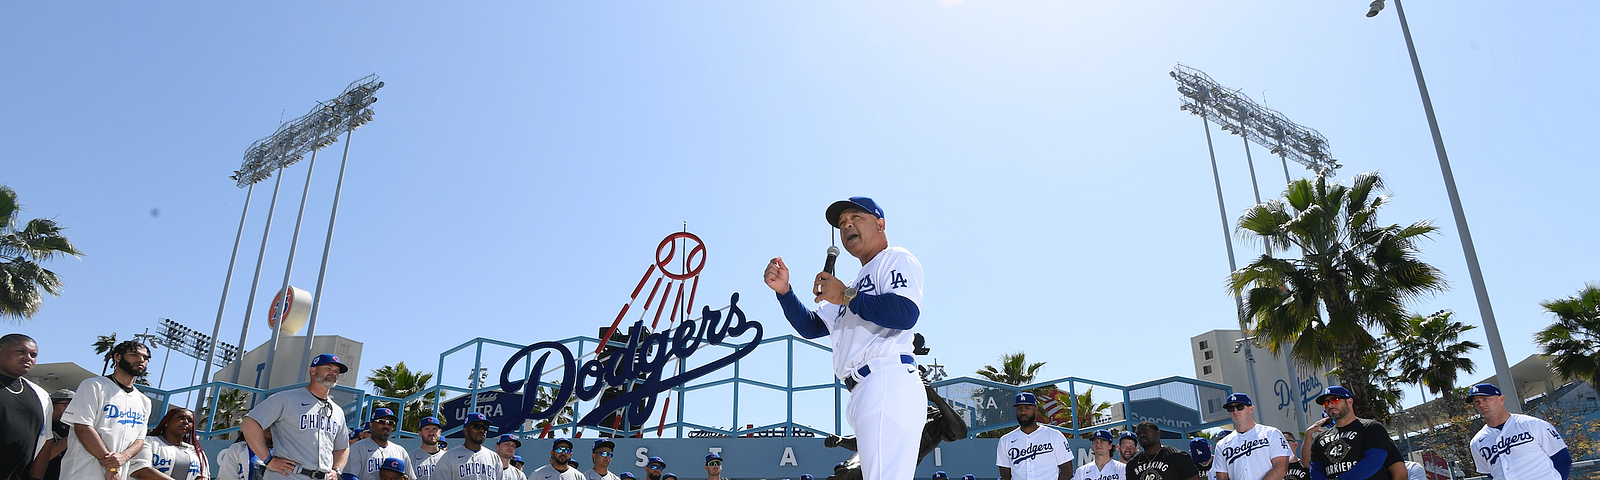 David Peralta has his 'Welcome to the Dodgers' moment, by Cary Osborne